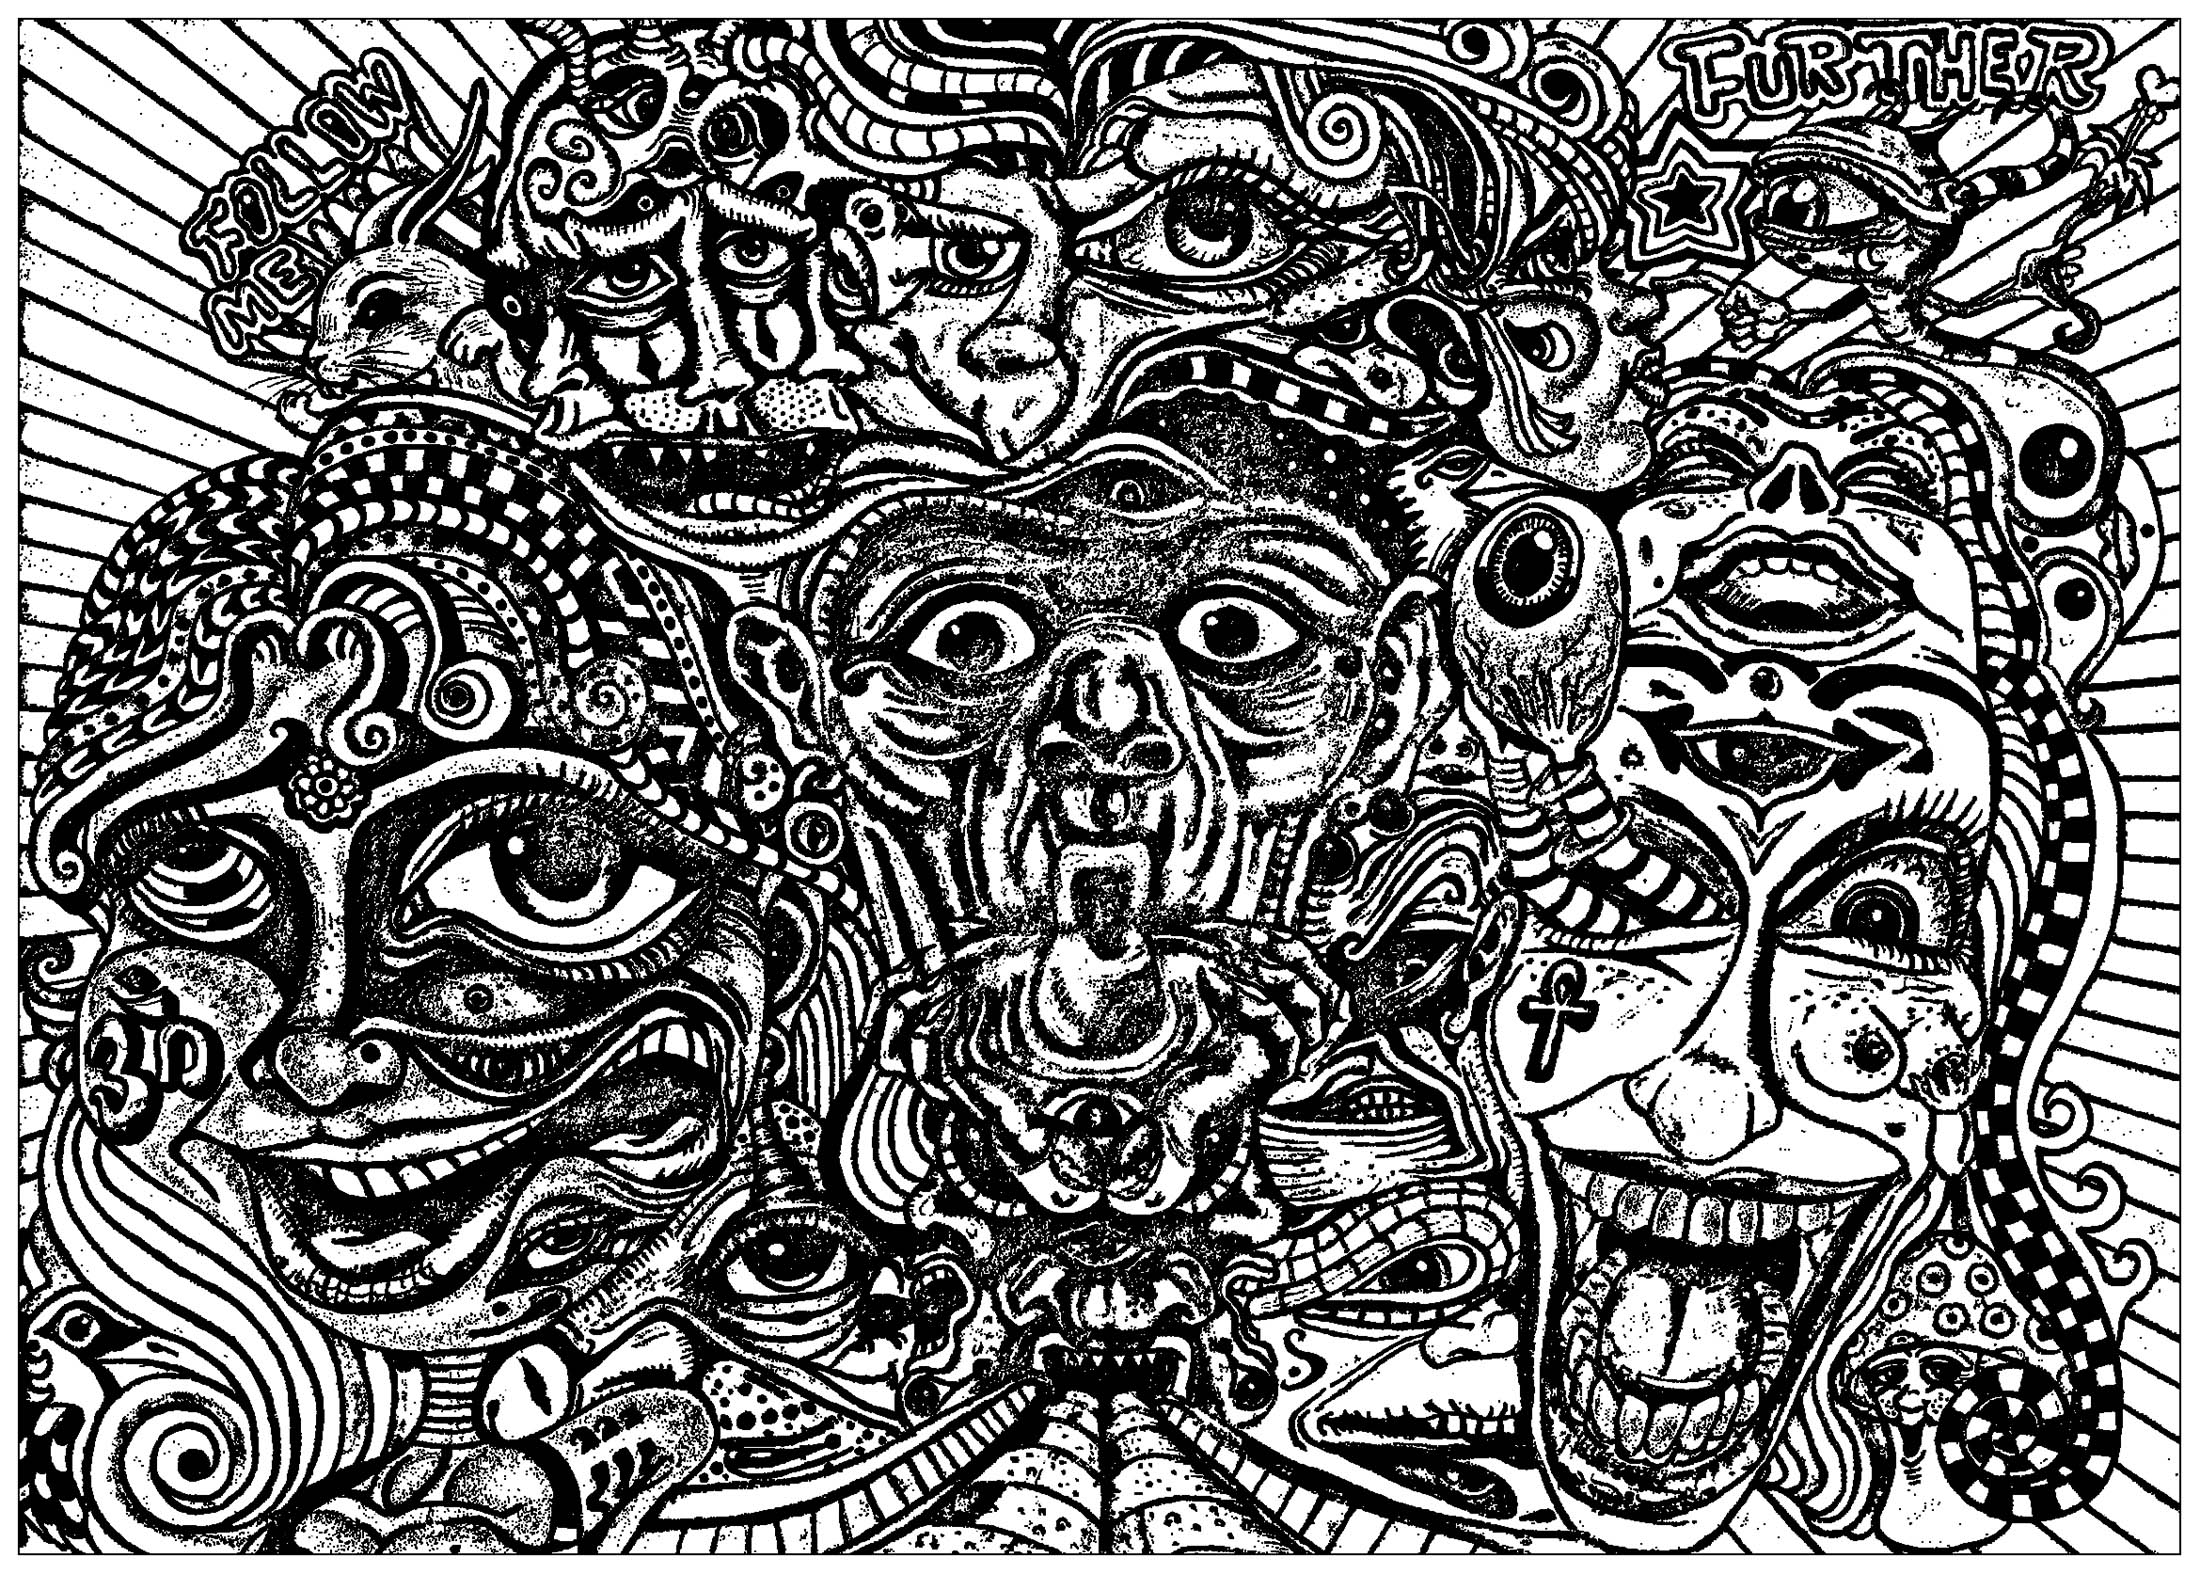 Psychedelic faces - Psychedelic Adult Coloring Pages